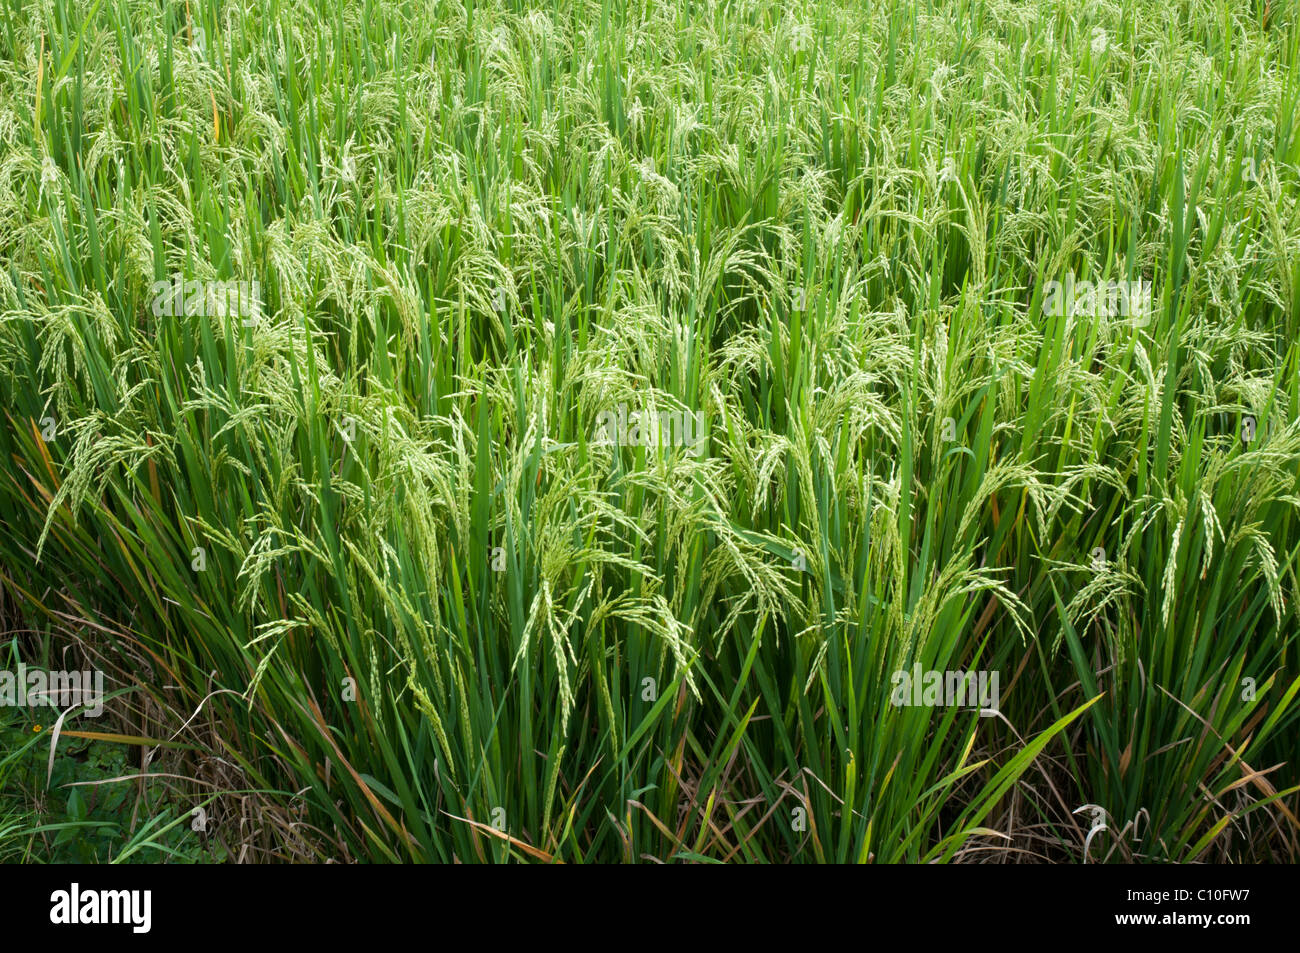 Rice cultivation in Bali Indonesia Stock Photo